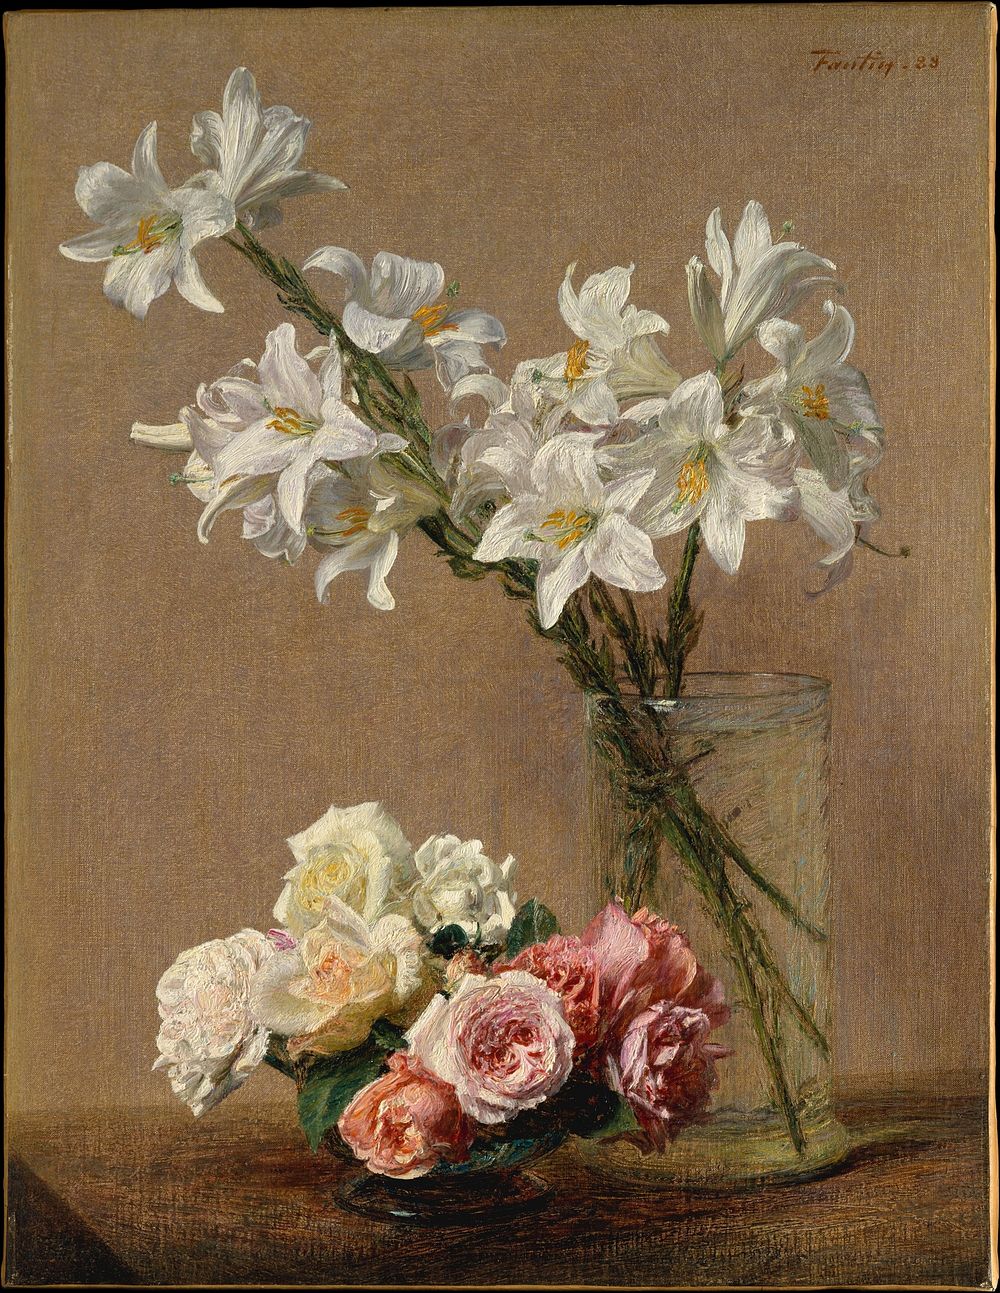 Roses and Lilies (1888) by Henri Fantin&ndash;Latour.  